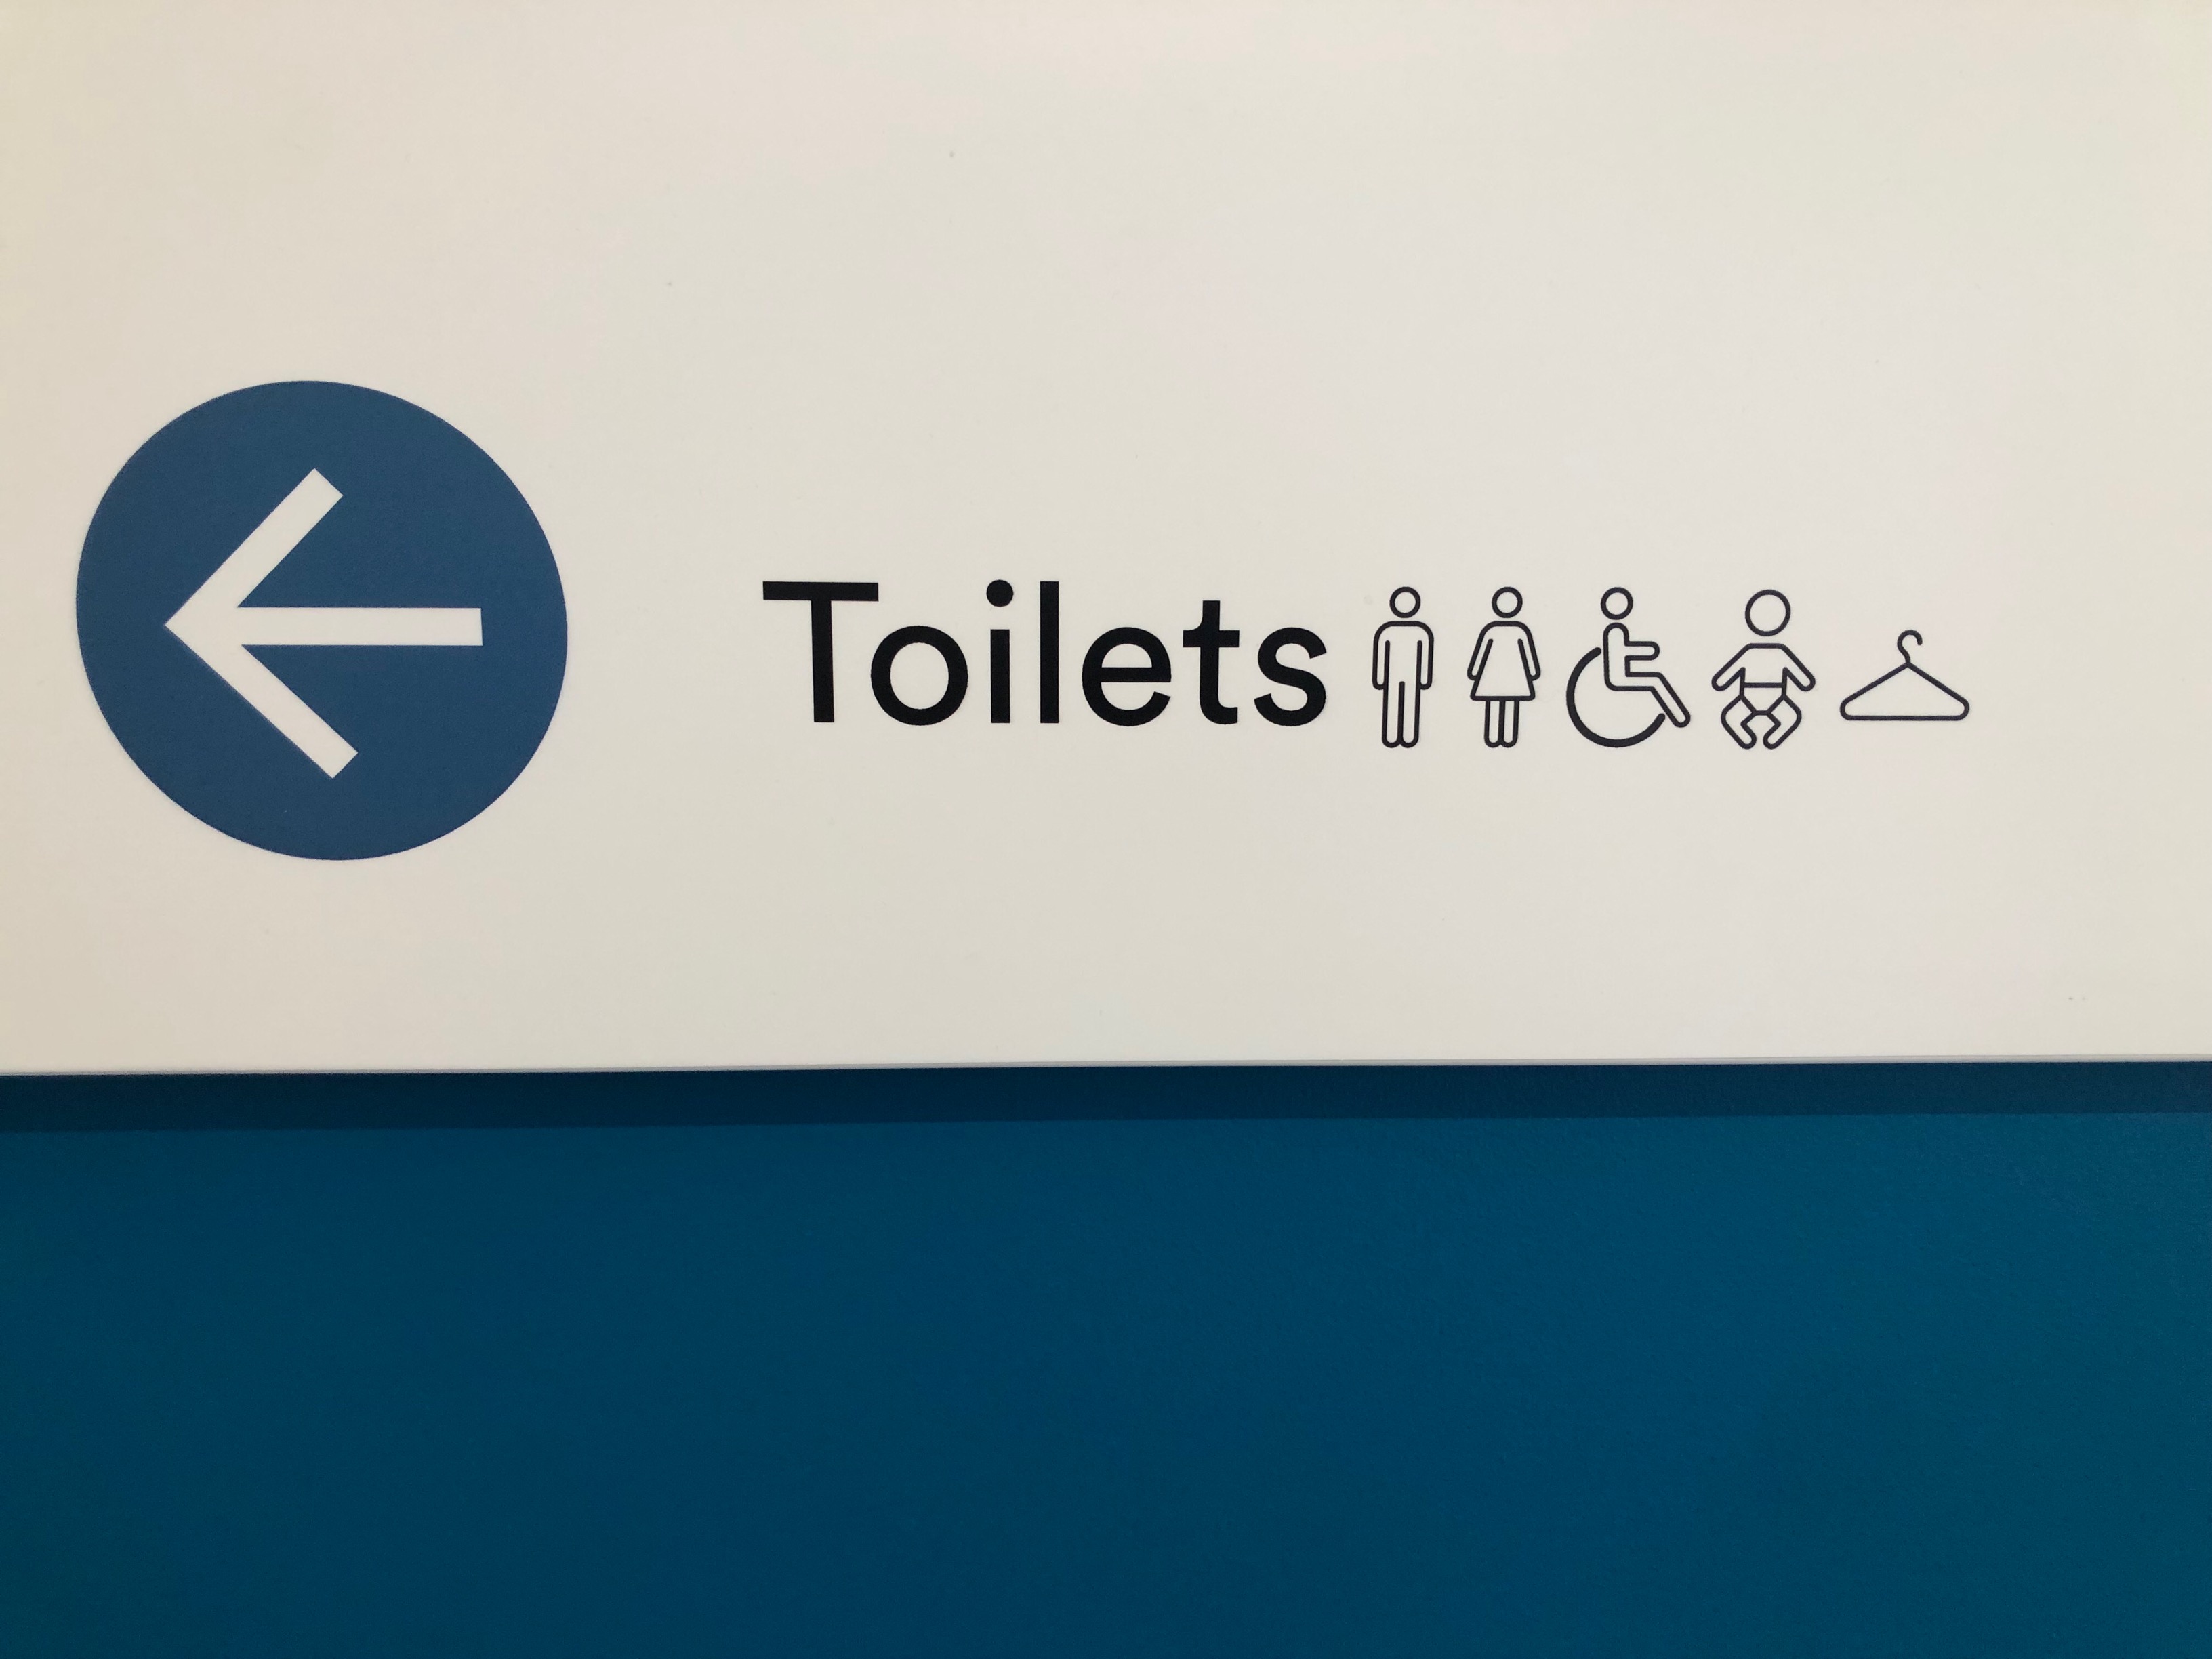 Image of signage saying Toilets, with icons of male, female, wheelchair, infant and coathanger with an arrow pointing to the left